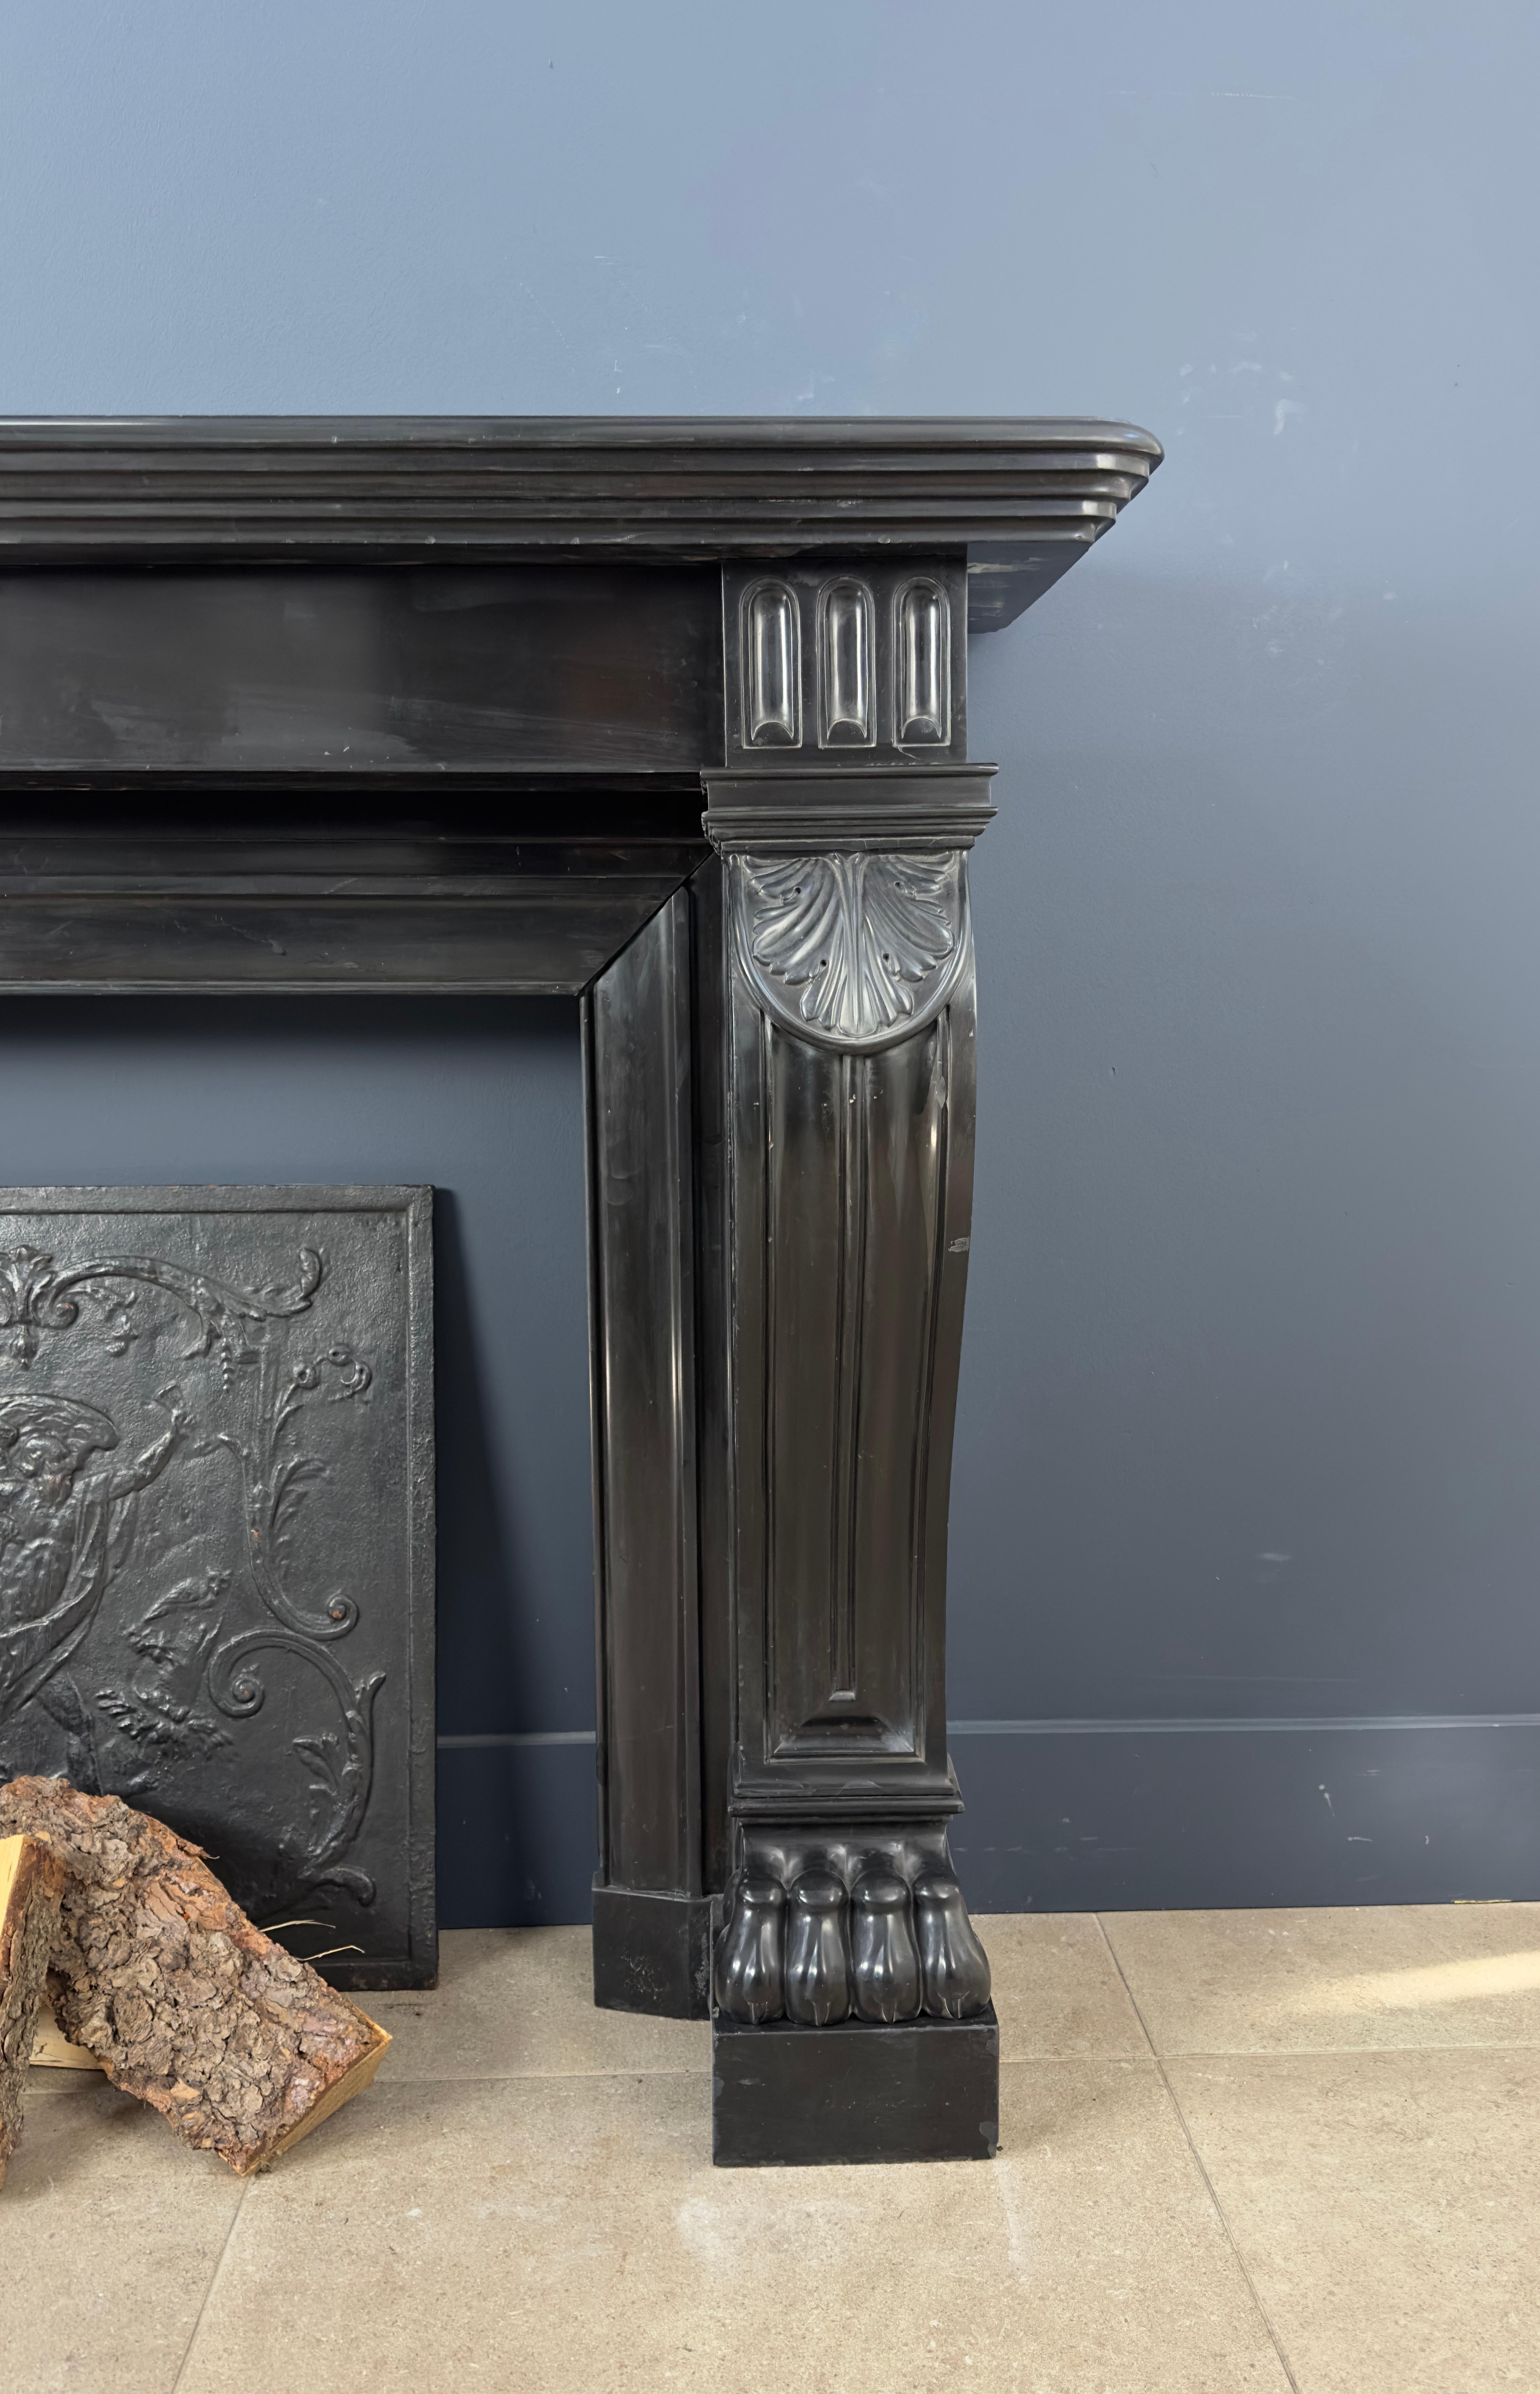 

Exceptionally beautiful and powerfully decorated antique front fireplace crafted from the exquisite Noir de Mazy black marble. Every aspect of this fireplace exudes luxury and elegance, making it an unmistakable centerpiece in any room.

Be